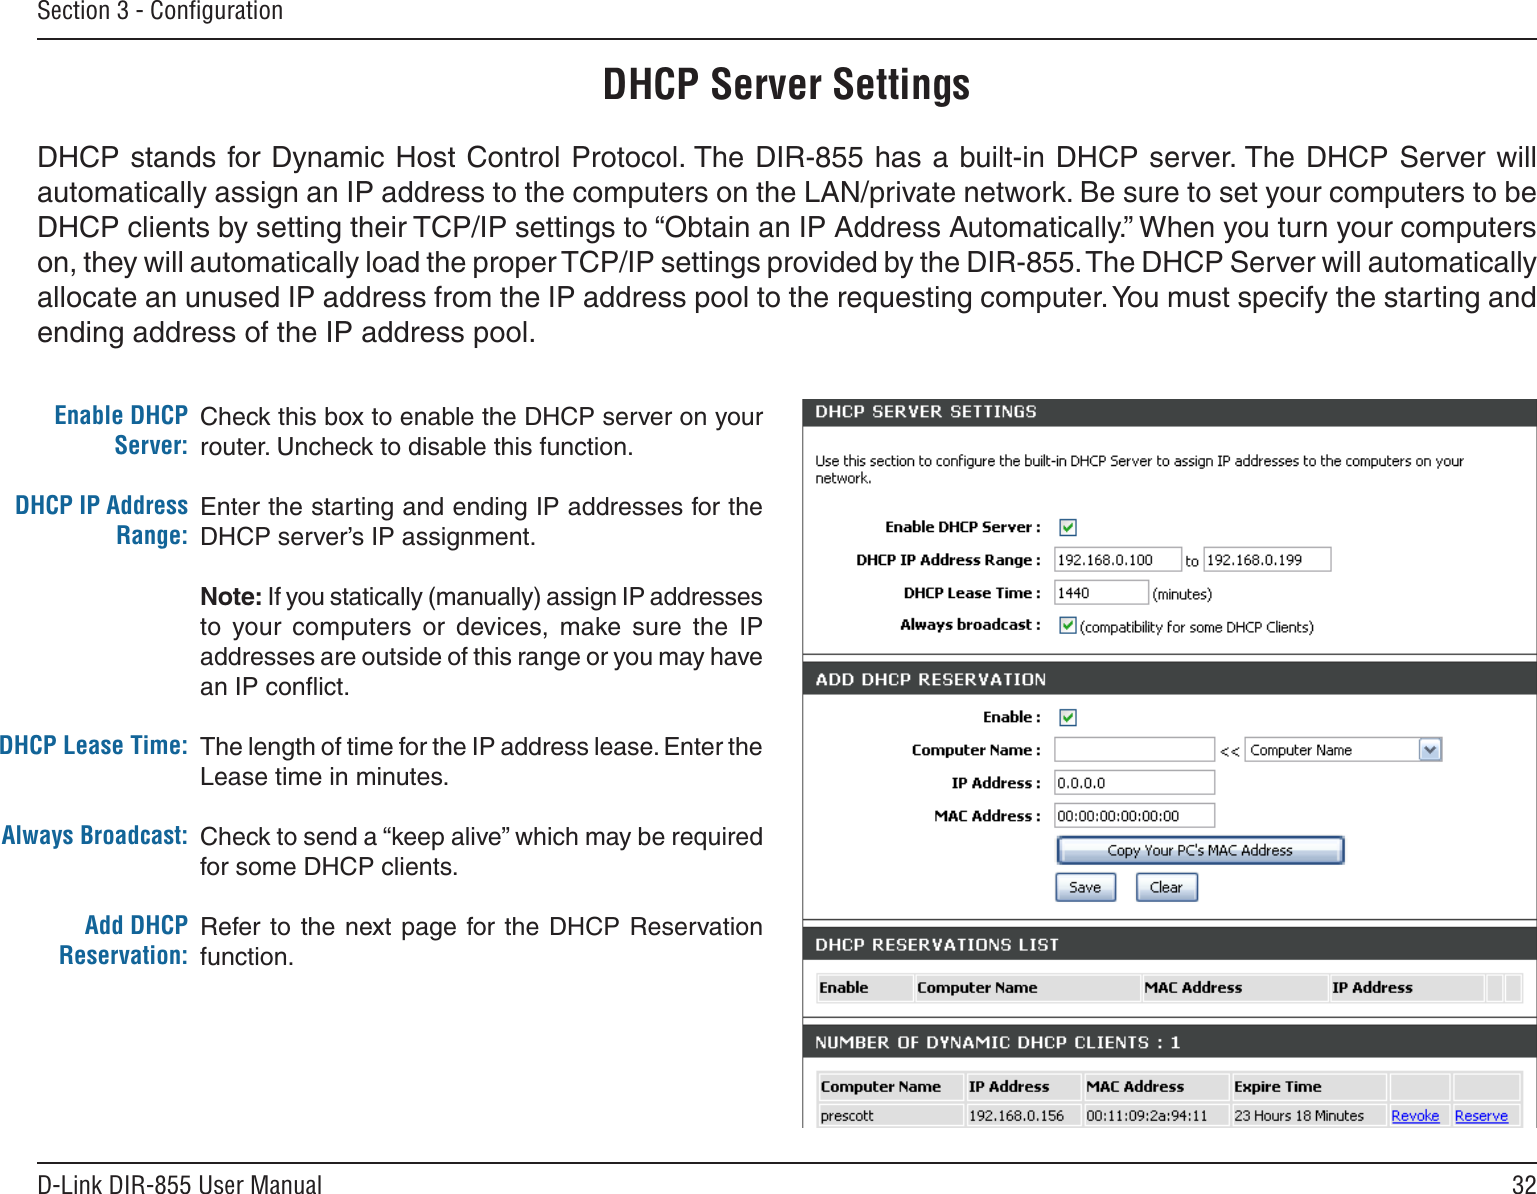 32D-Link DIR-855 User ManualSection 3 - ConﬁgurationCheck this box to enable the DHCP server on your router. Uncheck to disable this function.Enter the starting and ending IP addresses for the DHCP server’s IP assignment.Note: If you statically (manually) assign IP addresses to  your  computers  or  devices,  make  sure  the  IP addresses are outside of this range or you may have an IP conﬂict. The length of time for the IP address lease. Enter the Lease time in minutes.Check to send a “keep alive” which may be required for some DHCP clients.Refer to the next page for the DHCP  Reservation function.Enable DHCP Server:DHCP IP Address Range:DHCP Lease Time:Always Broadcast:Add DHCP Reservation:DHCP Server SettingsDHCP stands for Dynamic Host Control Protocol. The DIR-855 has a built-in DHCP server. The DHCP Server will automatically assign an IP address to the computers on the LAN/private network. Be sure to set your computers to be DHCP clients by setting their TCP/IP settings to “Obtain an IP Address Automatically.” When you turn your computers on, they will automatically load the proper TCP/IP settings provided by the DIR-855. The DHCP Server will automatically allocate an unused IP address from the IP address pool to the requesting computer. You must specify the starting and ending address of the IP address pool.